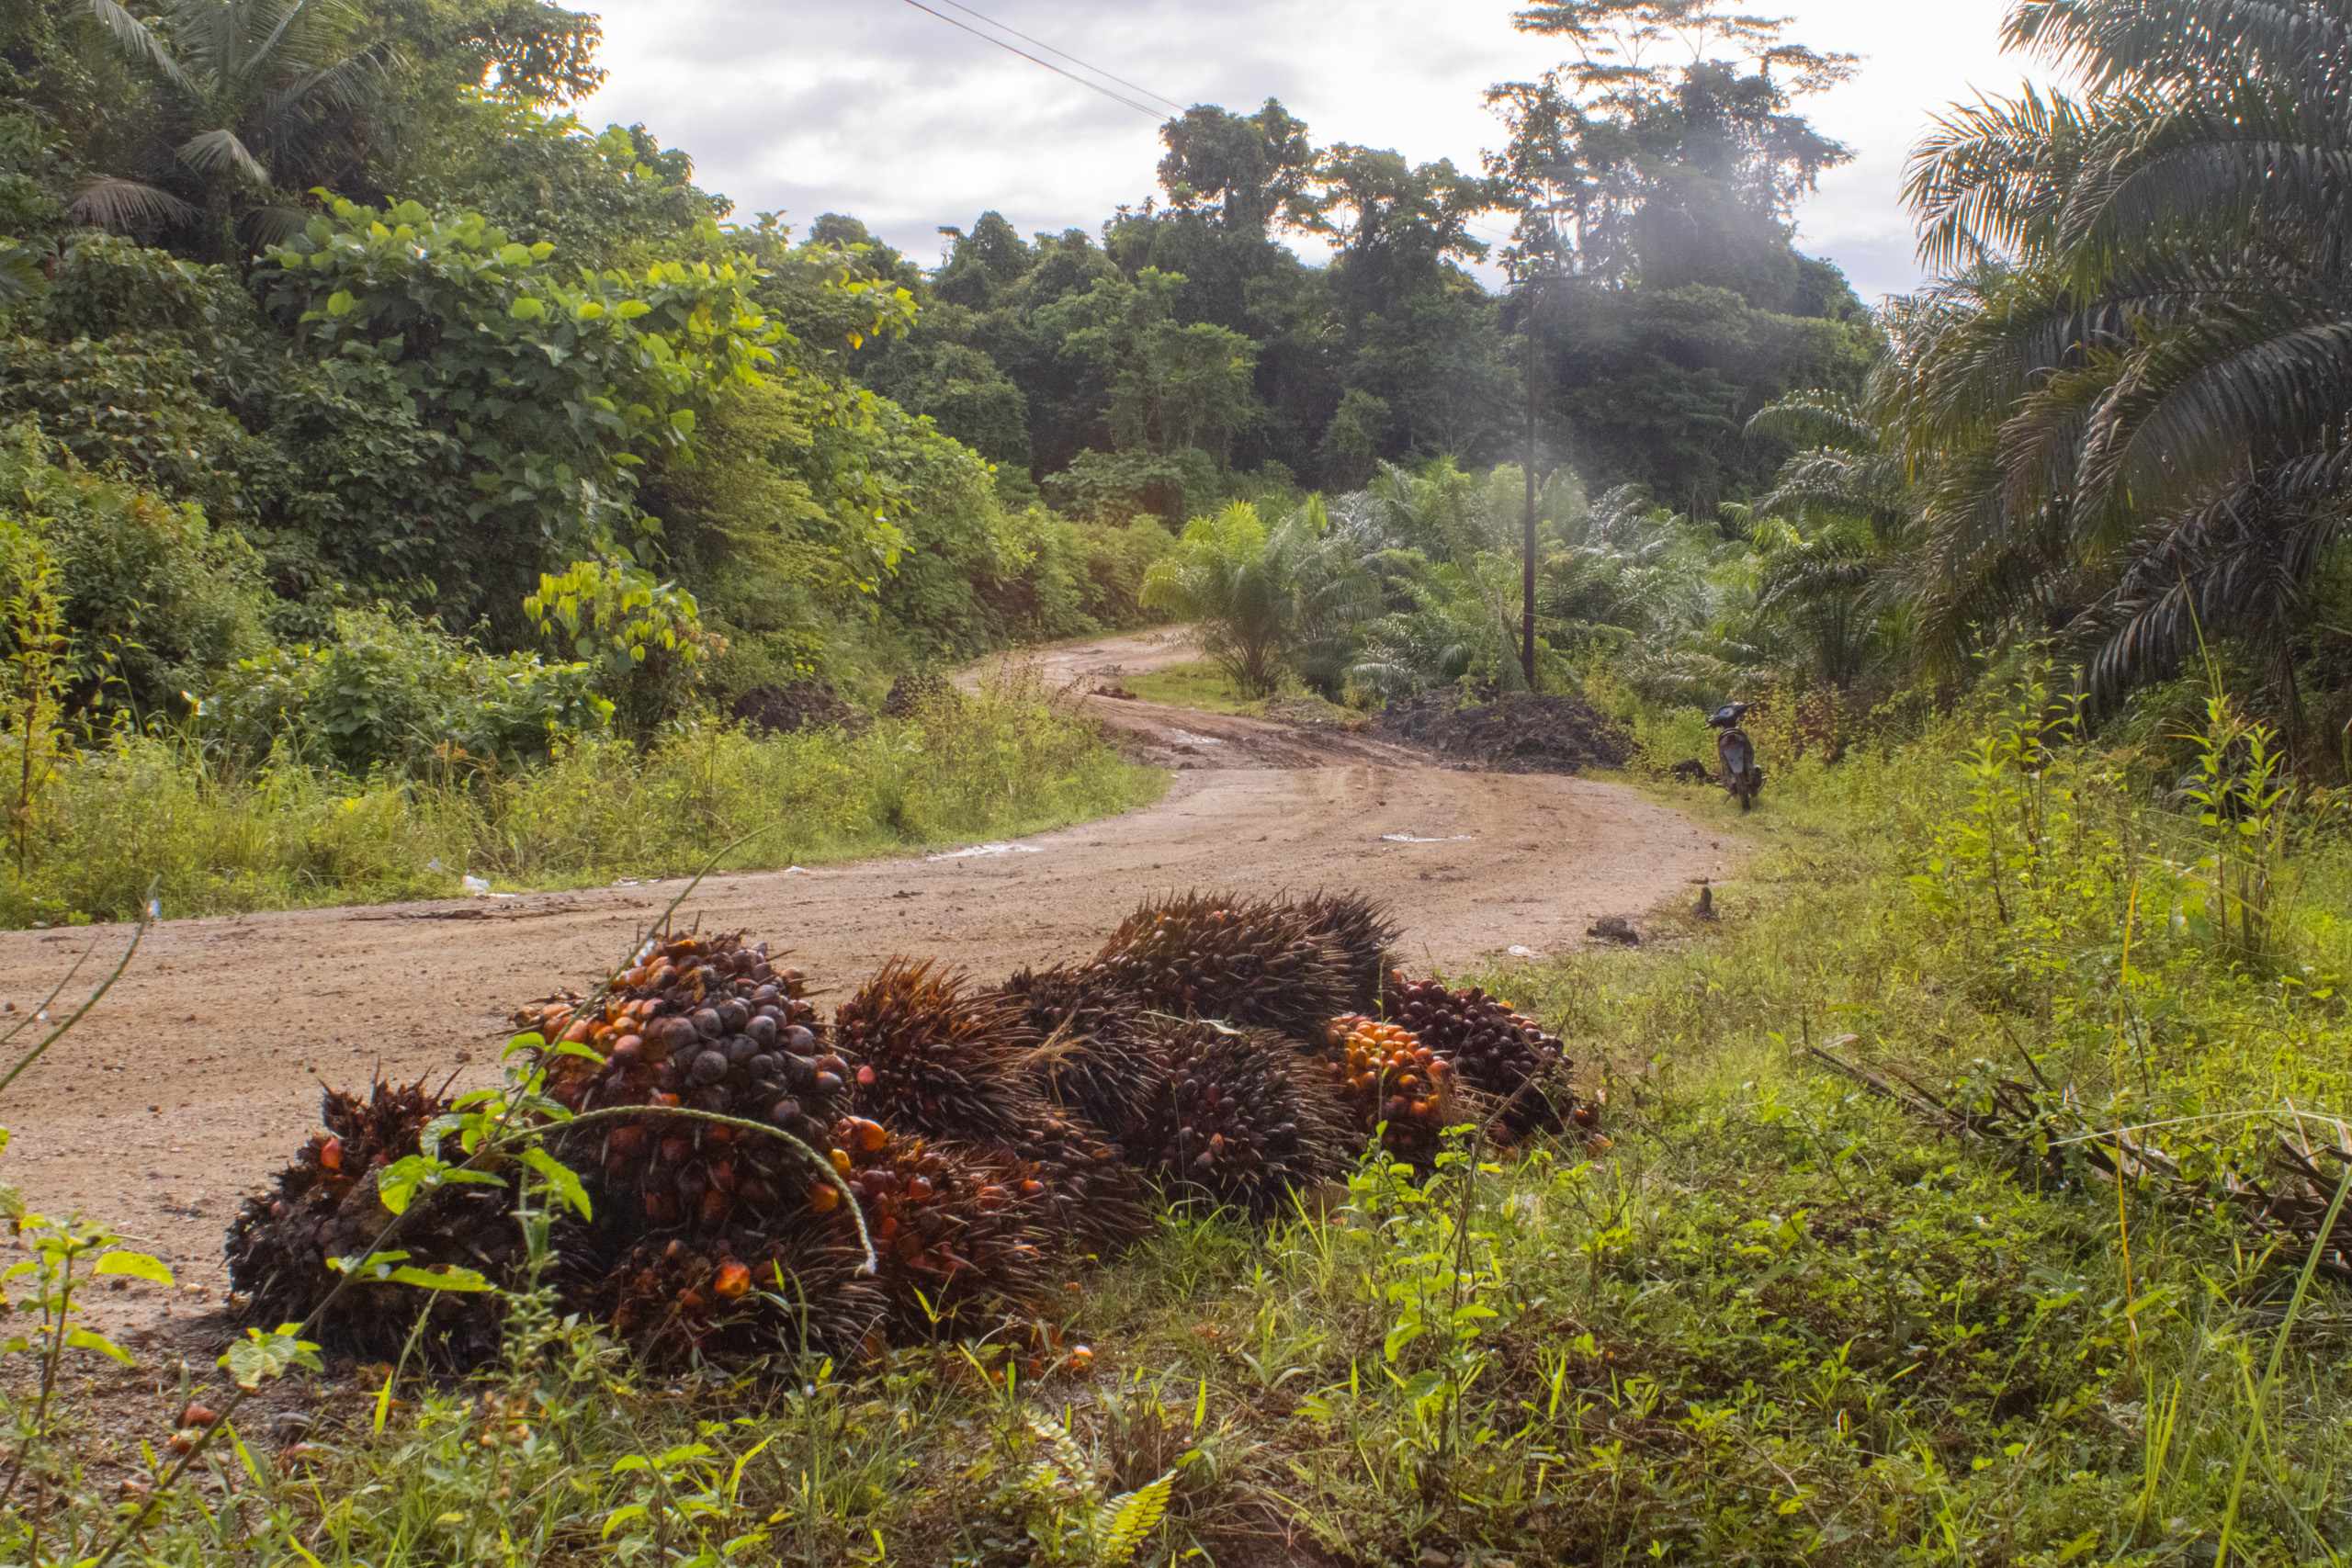 Oil palm fruit waiting to be collected by the side of the road leading to Segun